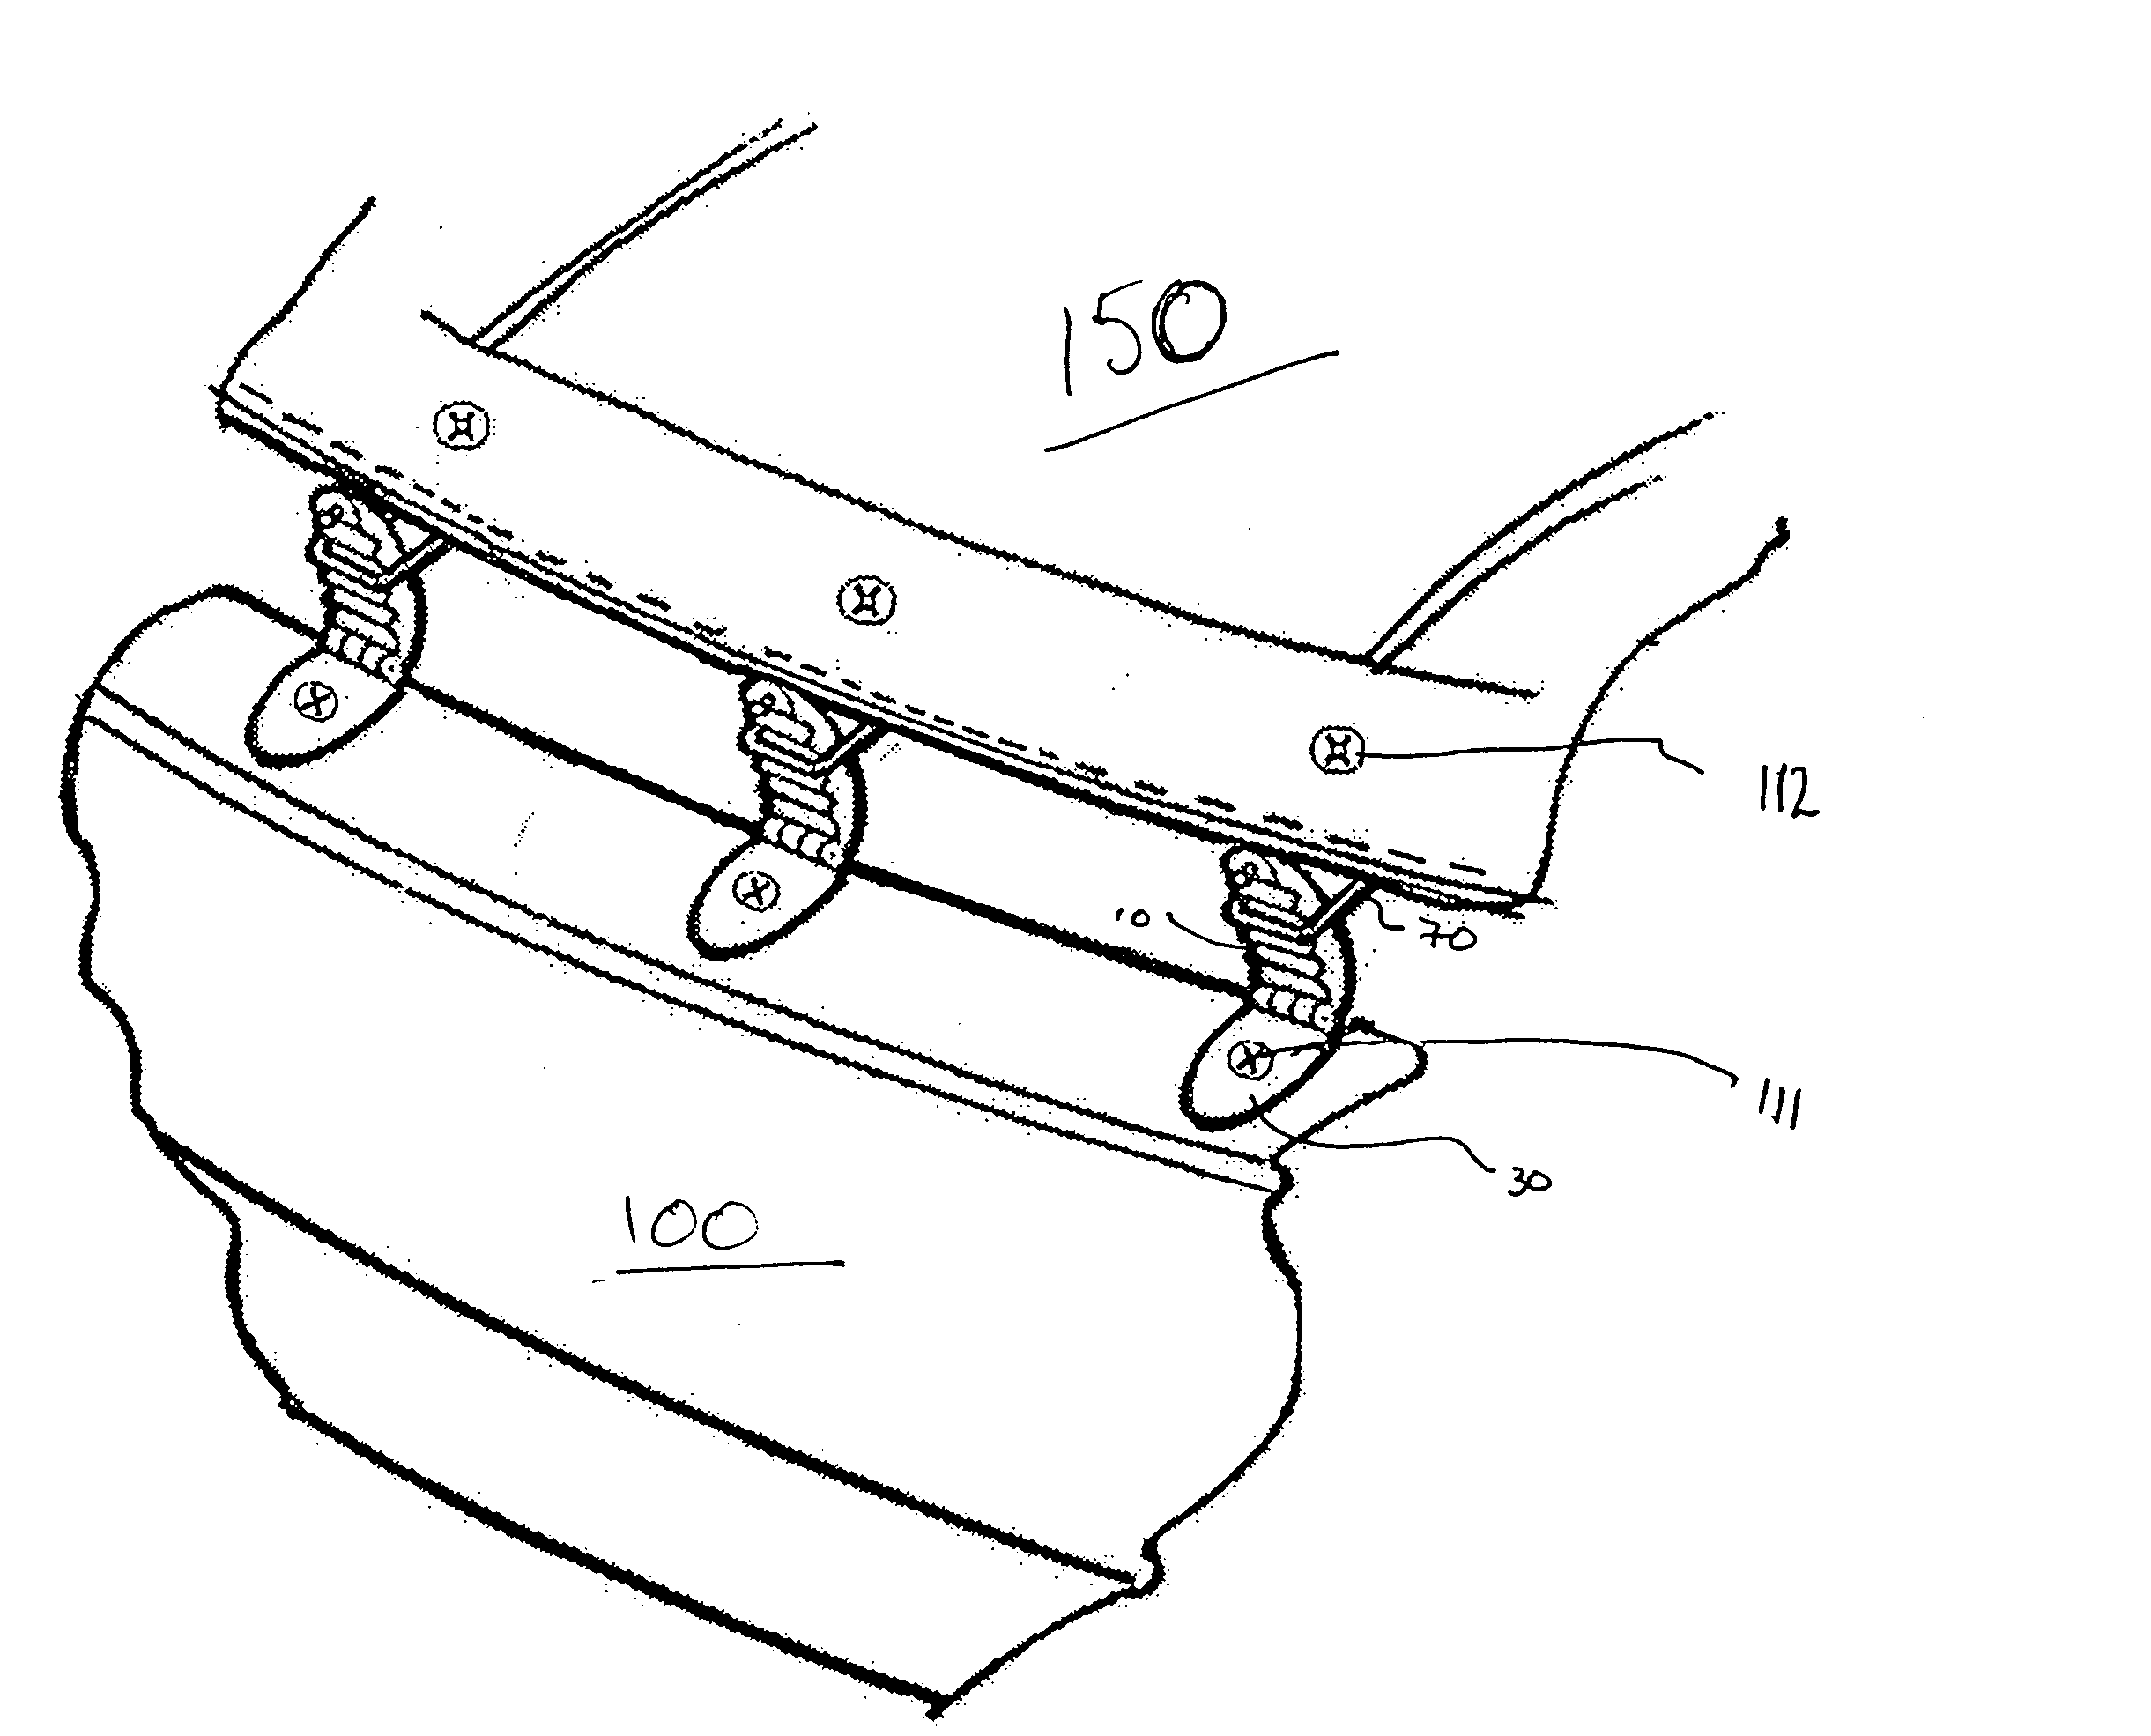 Variable tension fastening system for vehicle covers